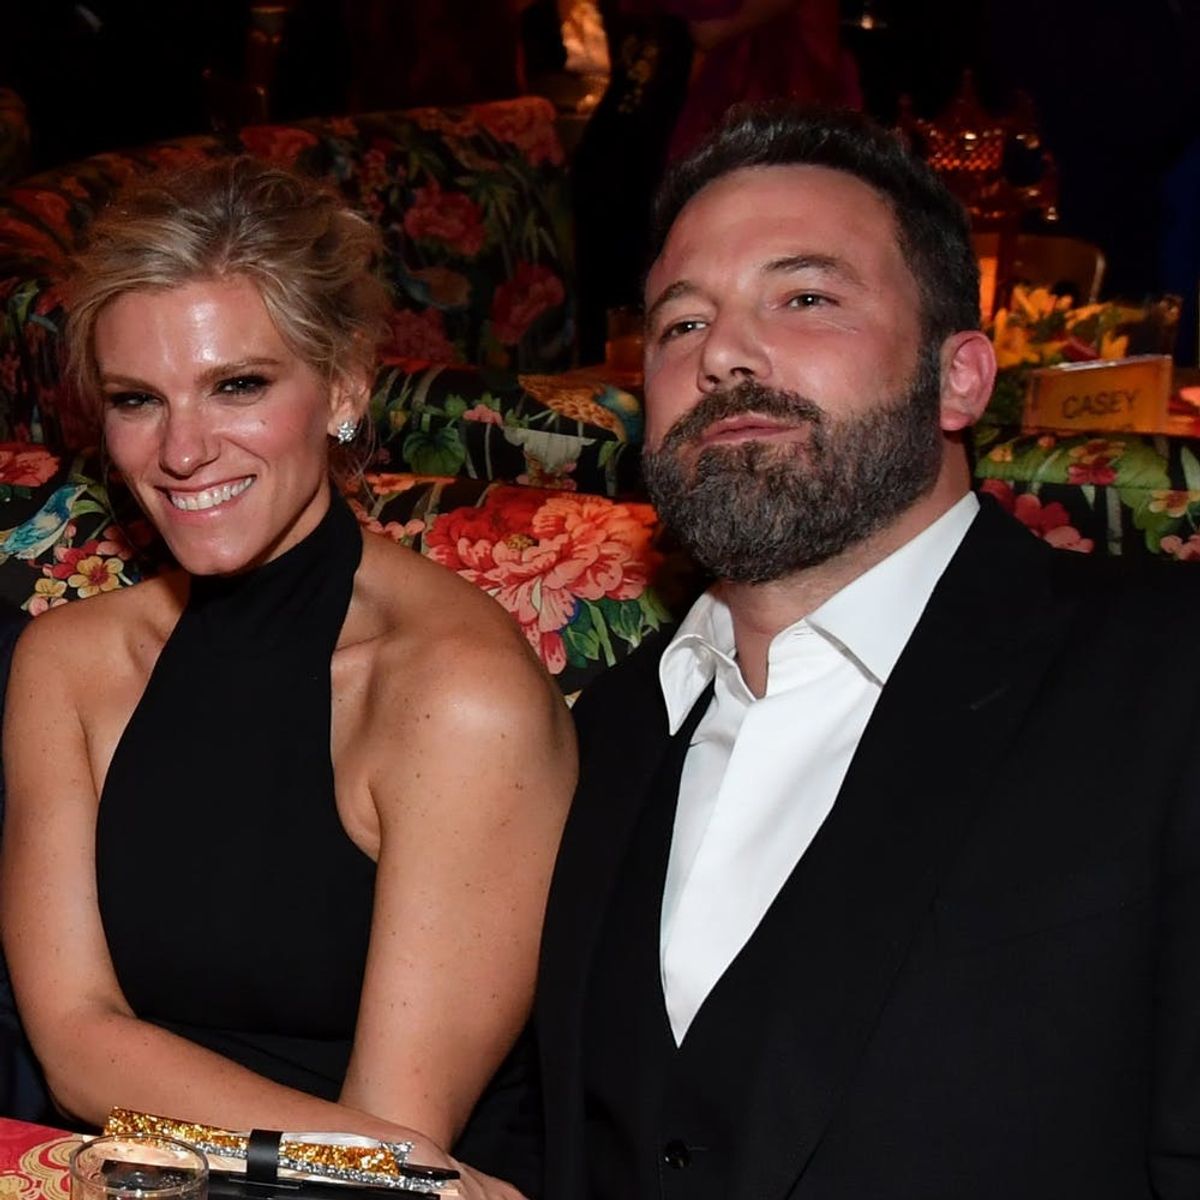 Ben Affleck and Lindsay Shookus Made Their Relationship Awards-Show Official at the 2017 Emmys